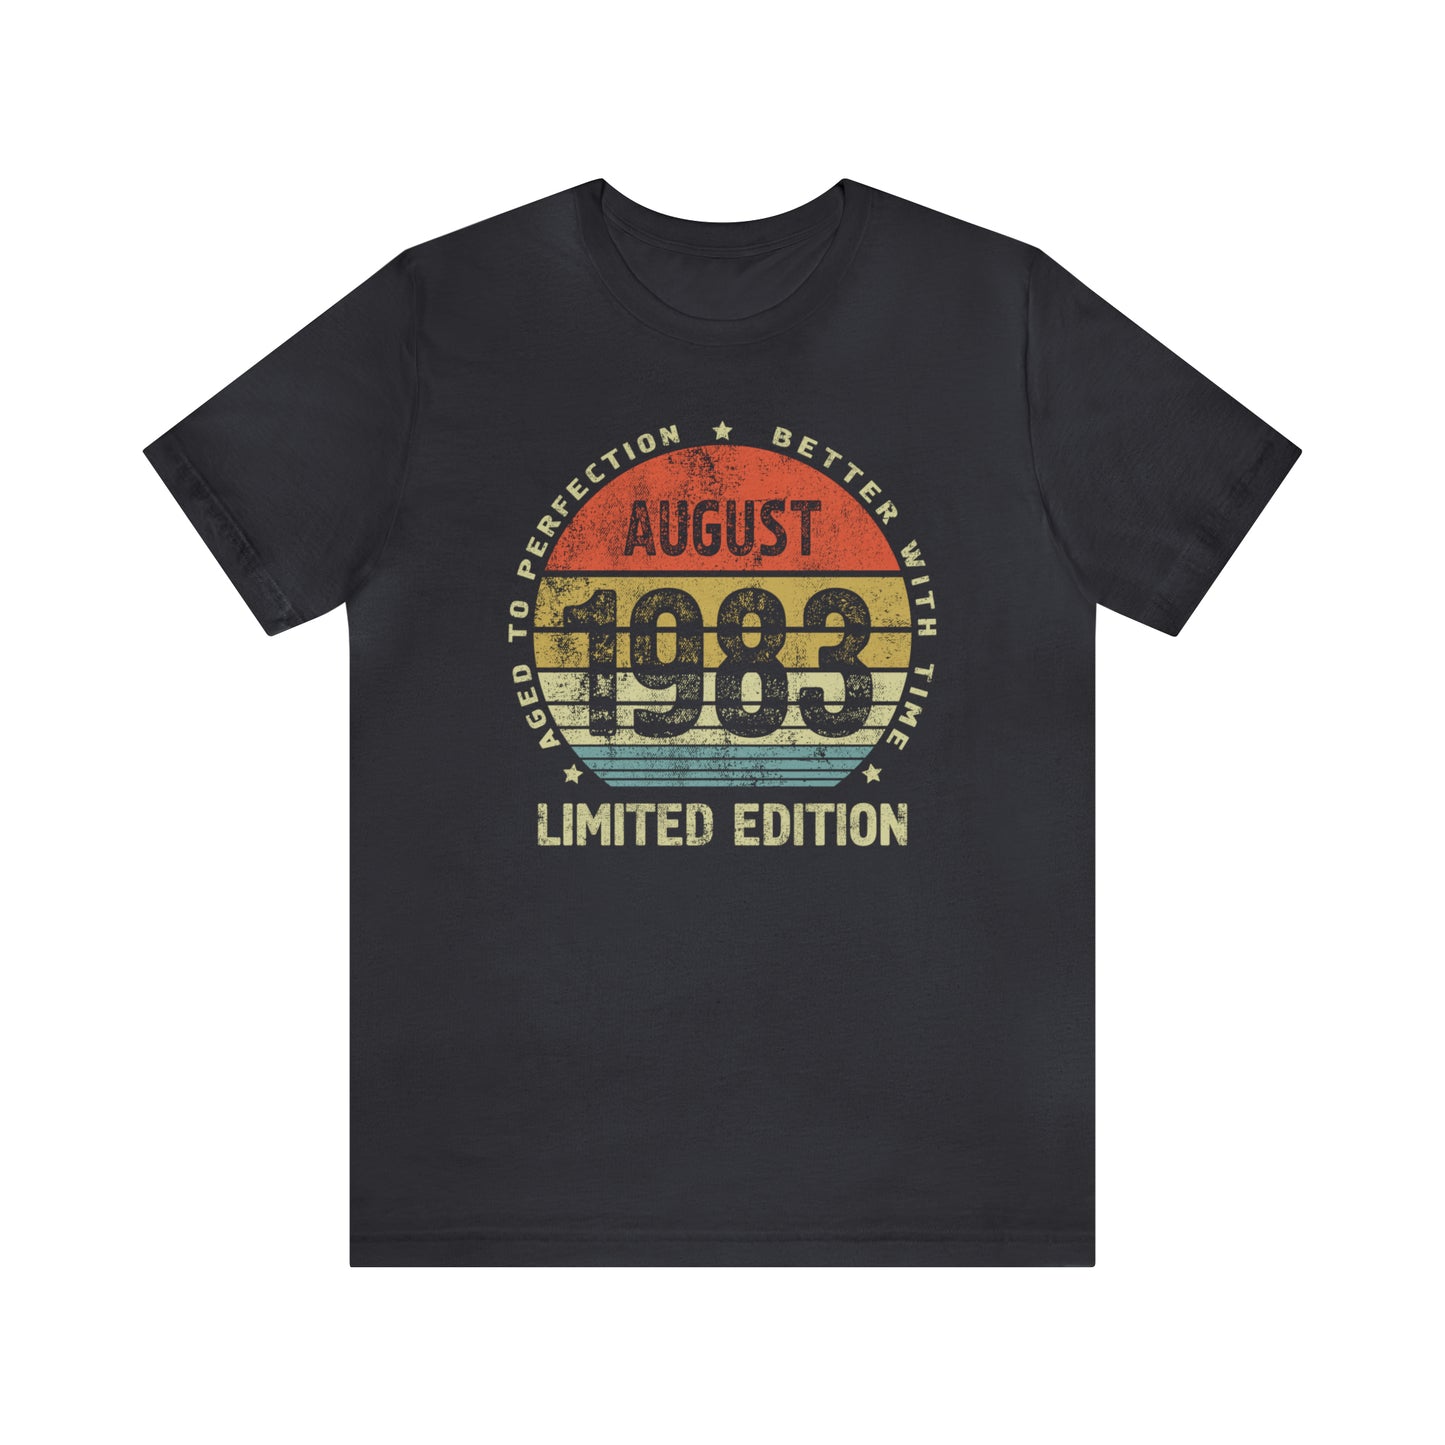 August 1983 birthday Shirt for women or men, Gift shirt for wife or husband, Better with time